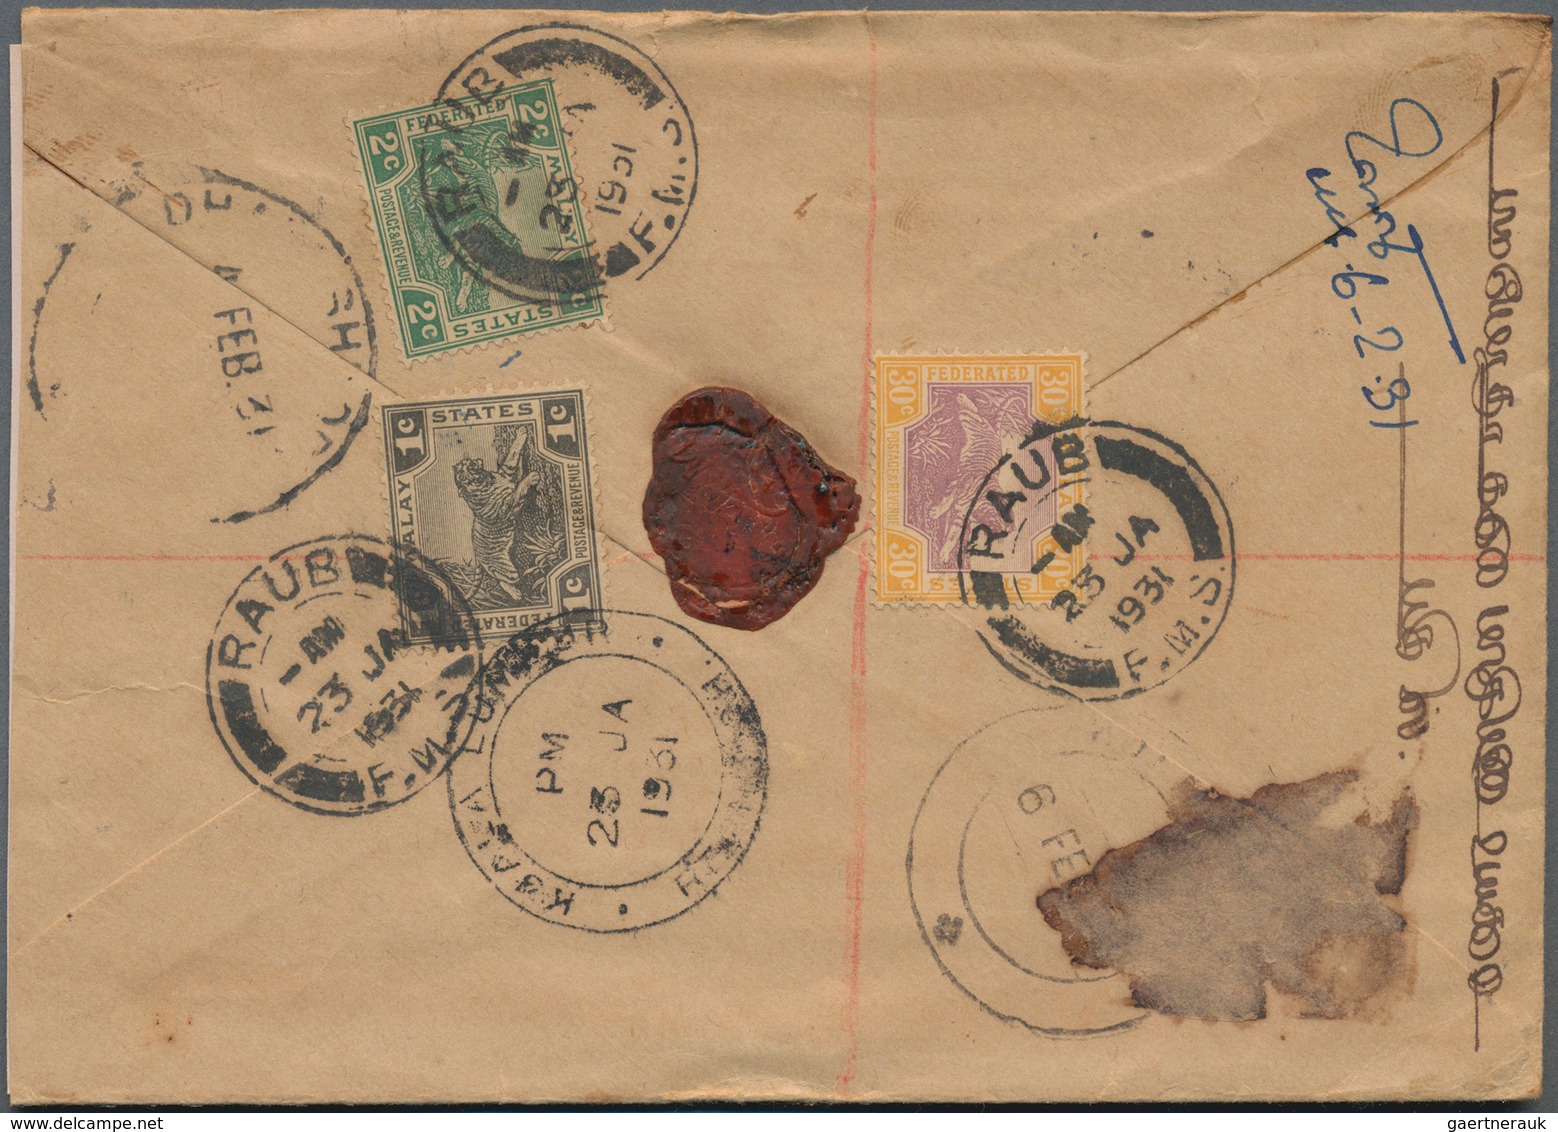 Malaiische Staaten - Perak: 1891-1950's ca.: More than 350 covers used in Perak, from few early cove